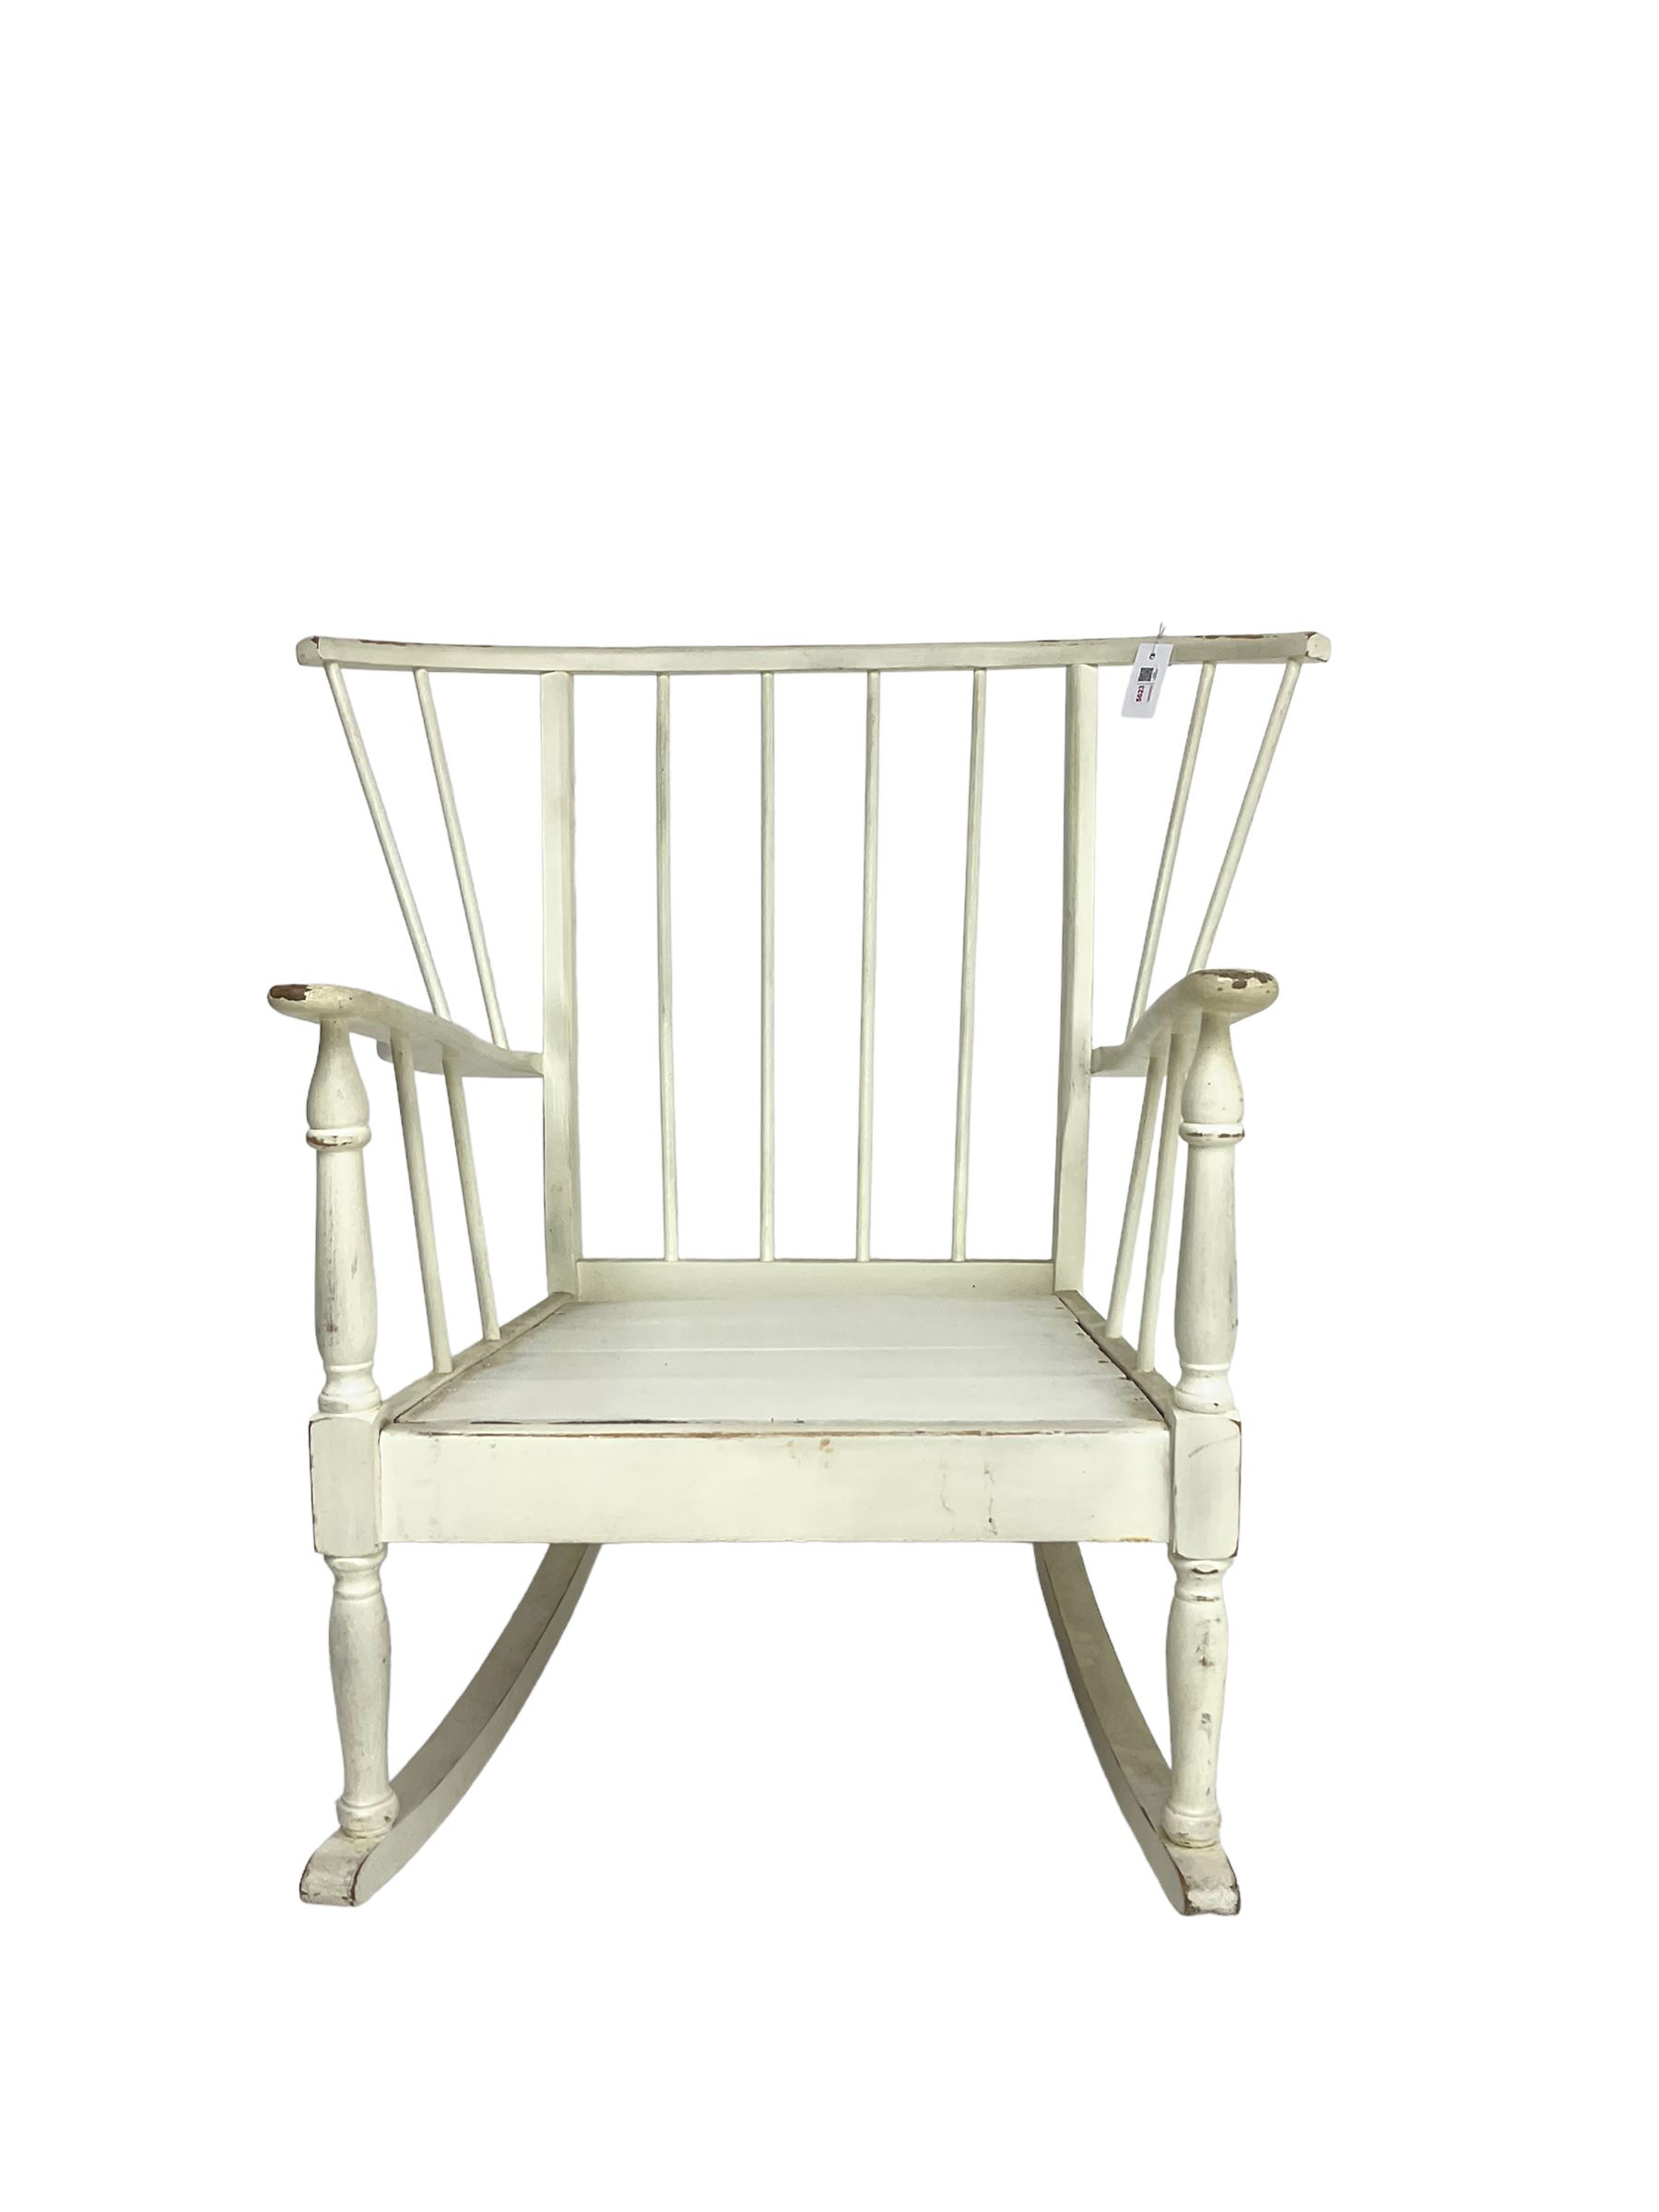 White painted rocking chair - Image 3 of 3